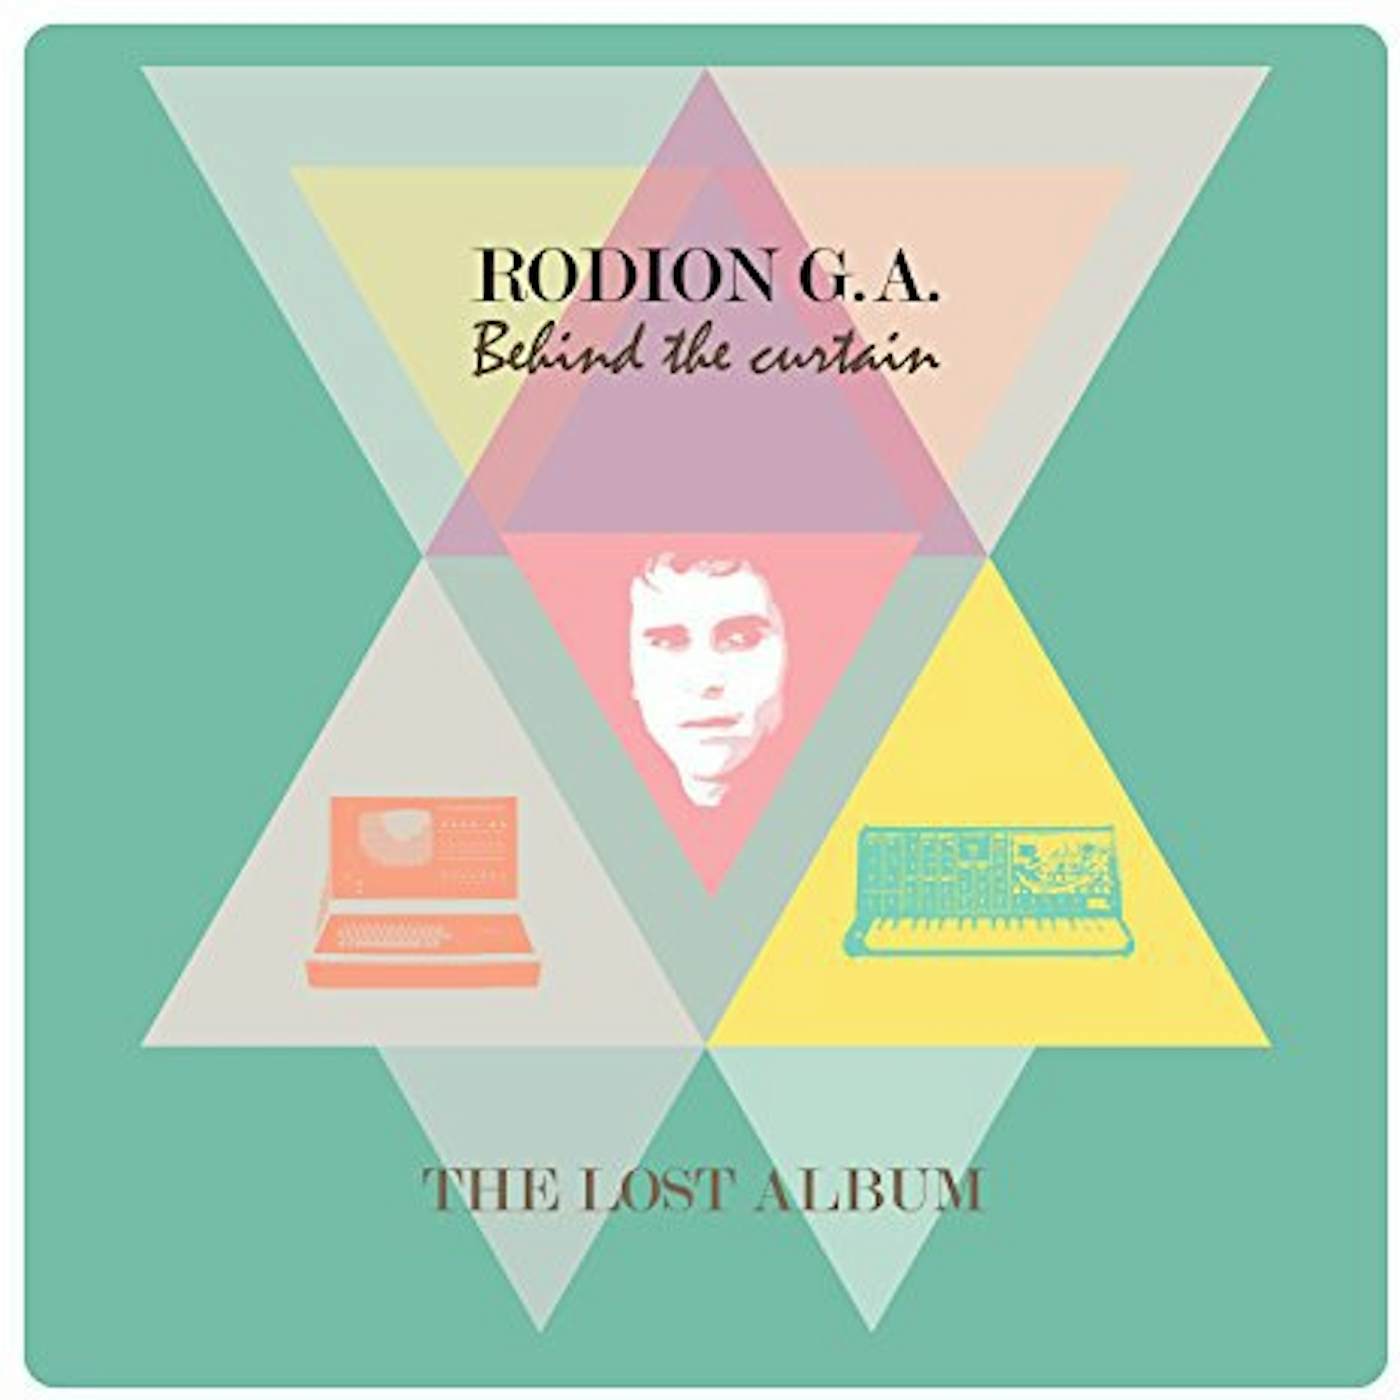 Rodion G.A. BEHIND THE CURTAIN Vinyl Record - UK Release